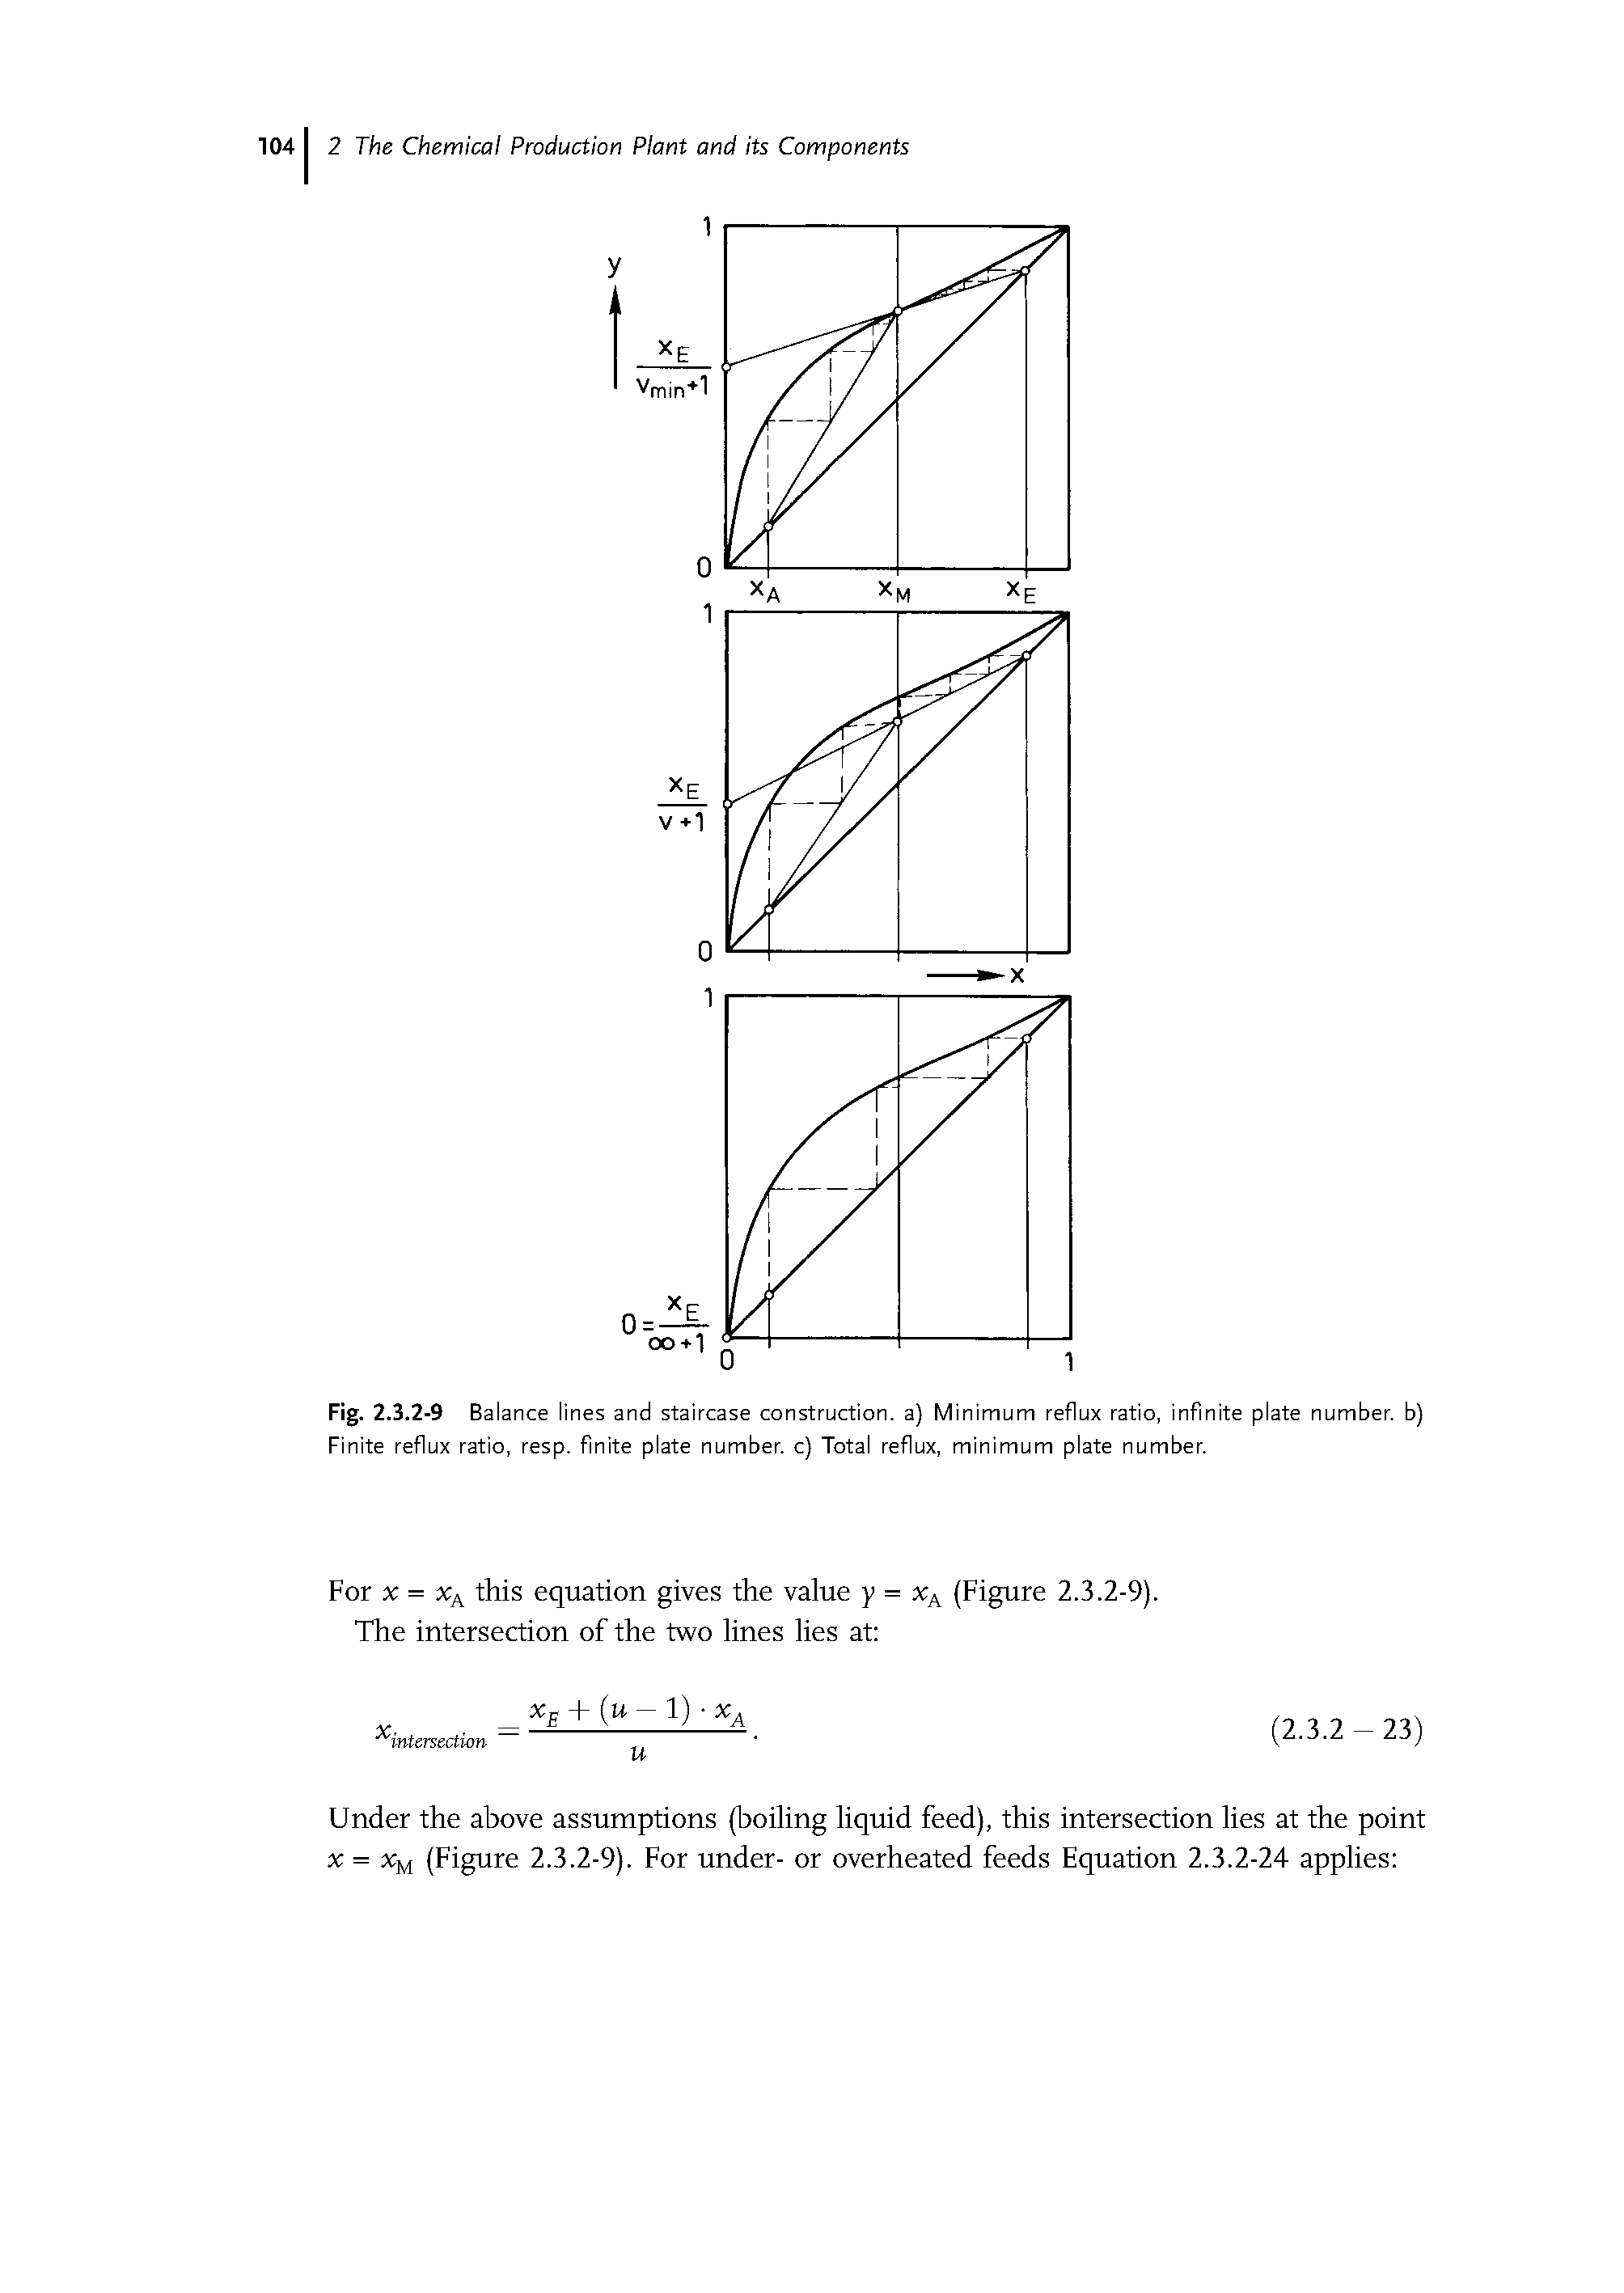 Fig. 2.3.2-9 Balance lines and staircase construction, a) Minimum reflux ratio, infinite plate number, b) Finite reflux ratio, resp. finite plate number, c) Total reflux, minimum plate number.